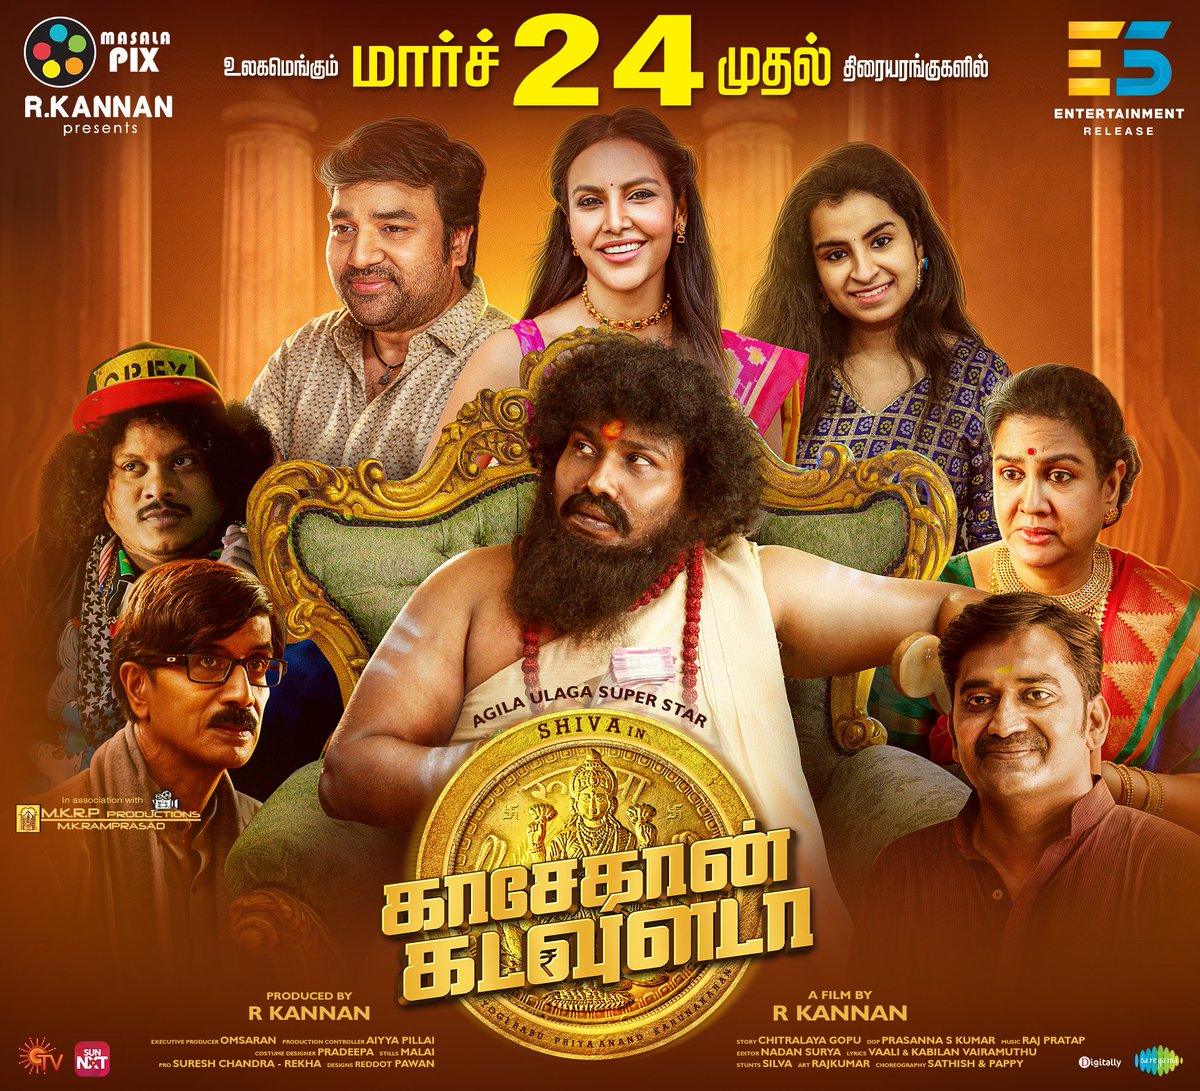 The biggest laughter-riot #KasethanKadavulada 🎊🎉 gears up for March 24 release. #KasethanKadavuladaFromMarch24